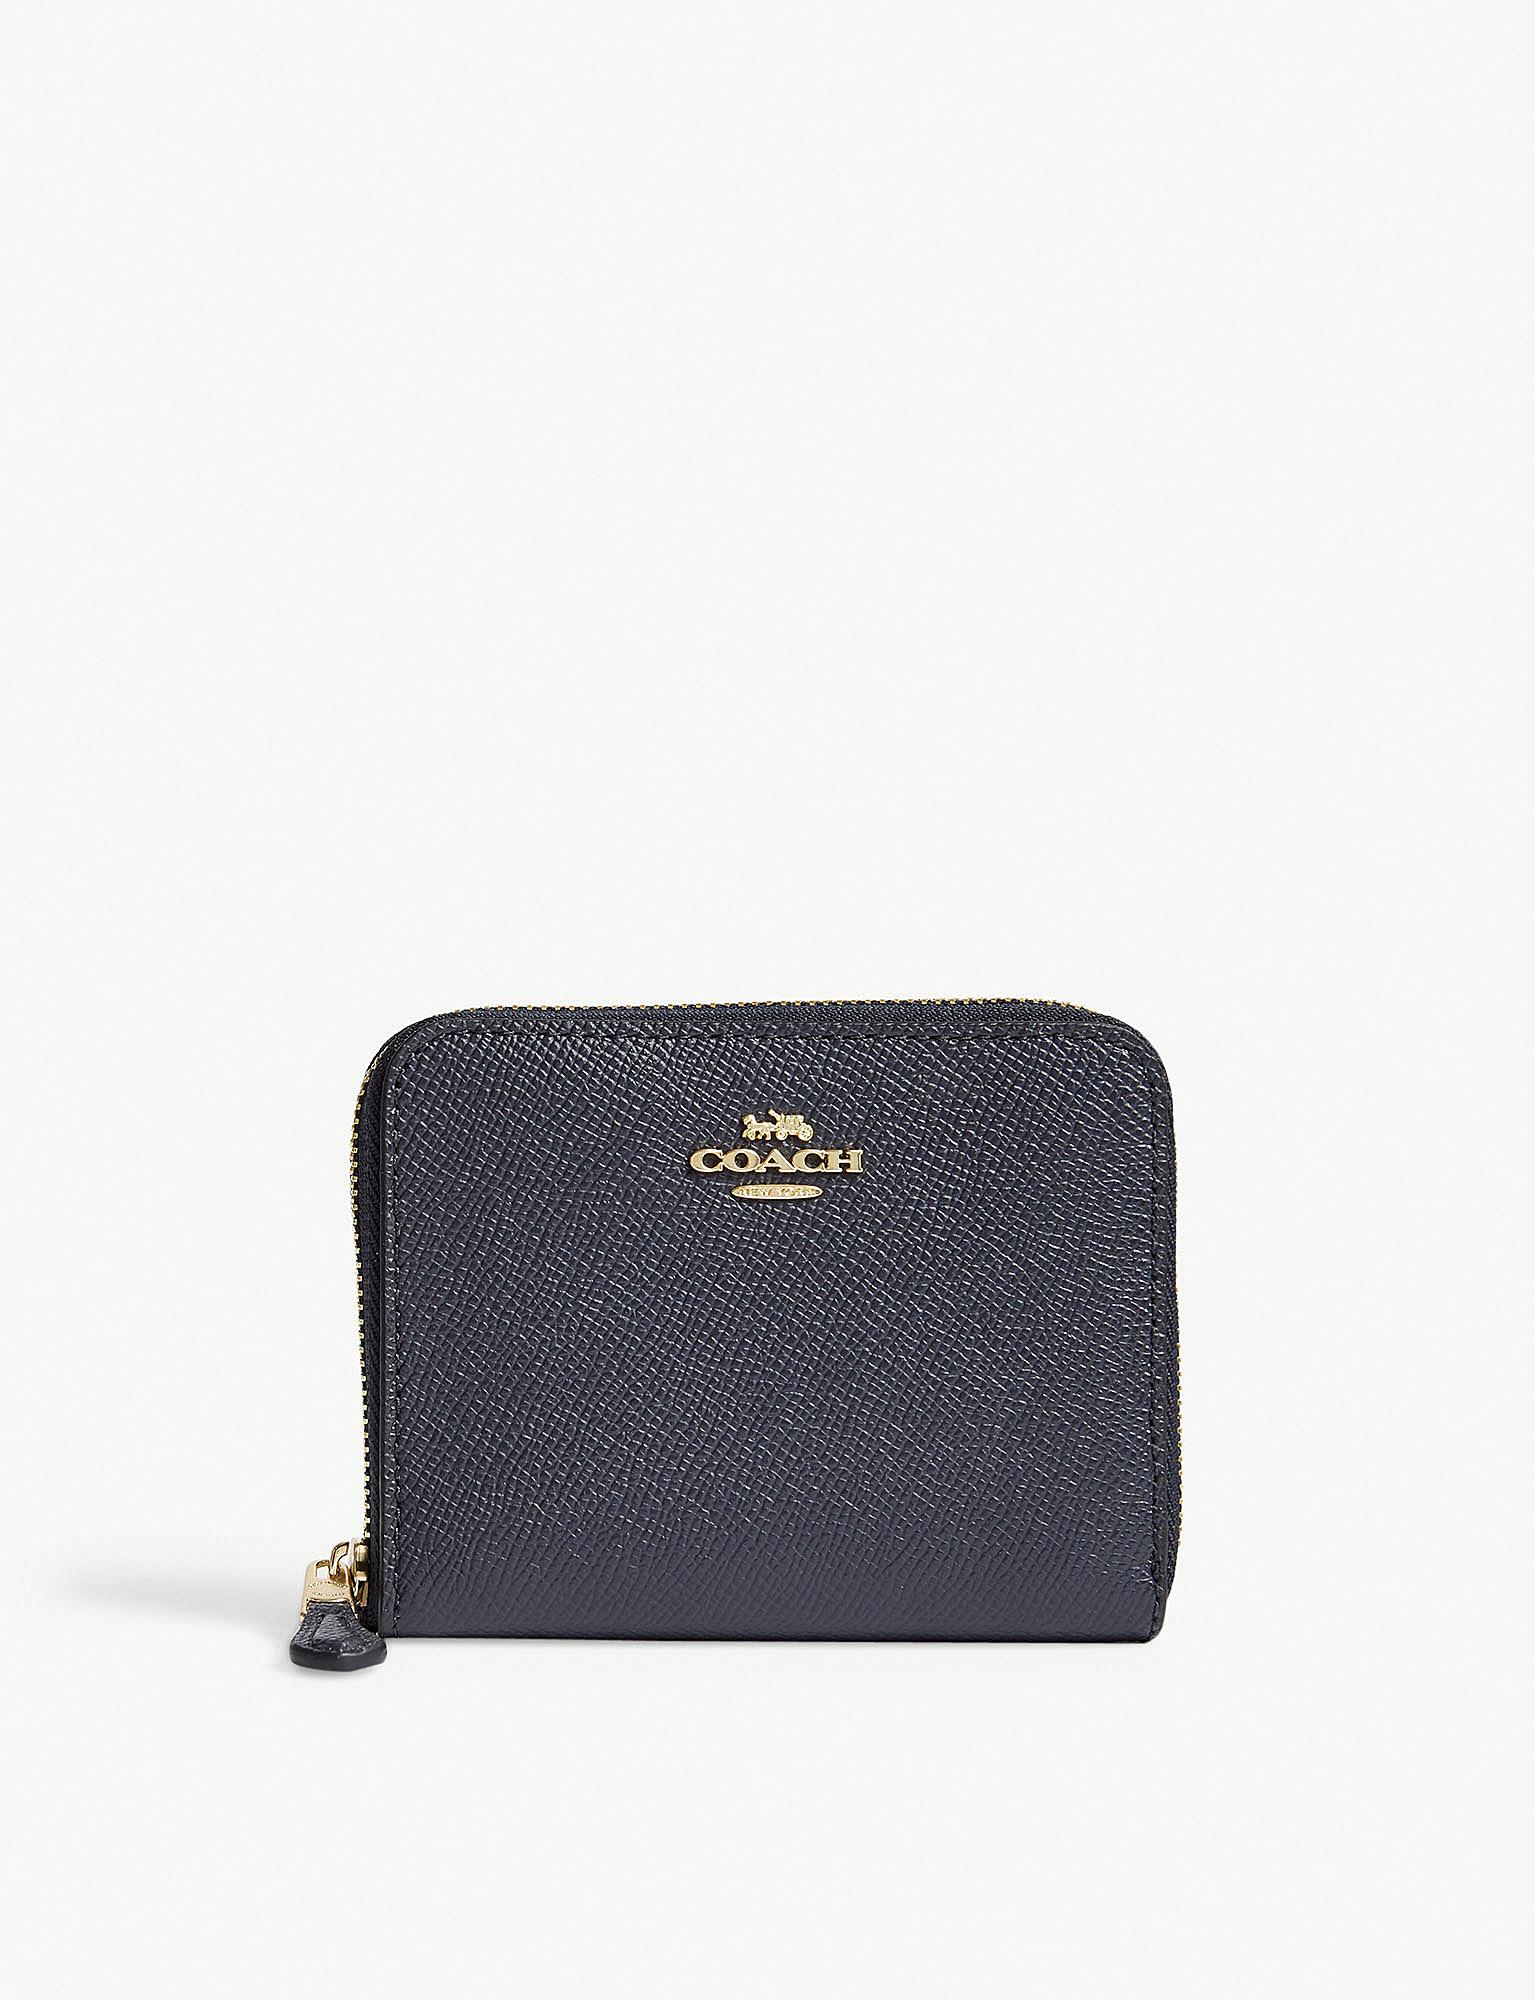 COACH Black Zip Around Small Leather Wallet - Lyst